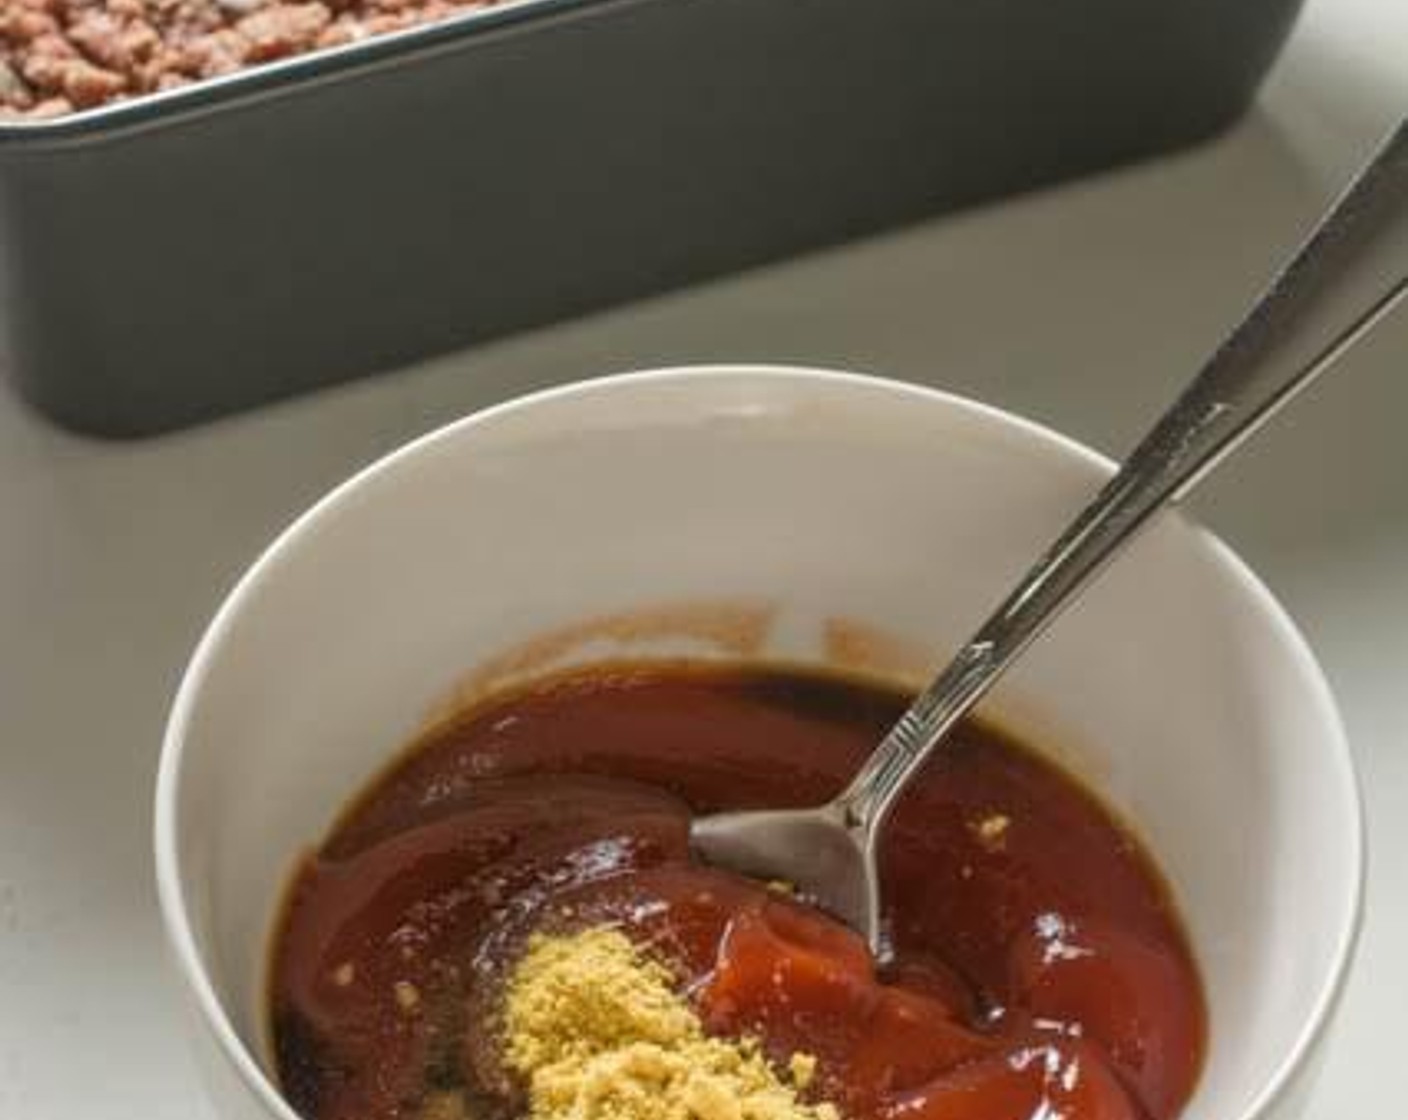 step 4 In a separate bowl, combine Ketchup (1 1/2 cups), Worcestershire Sauce (2 Tbsp), and Dry Mustard (1/2 Tbsp). Mix well.